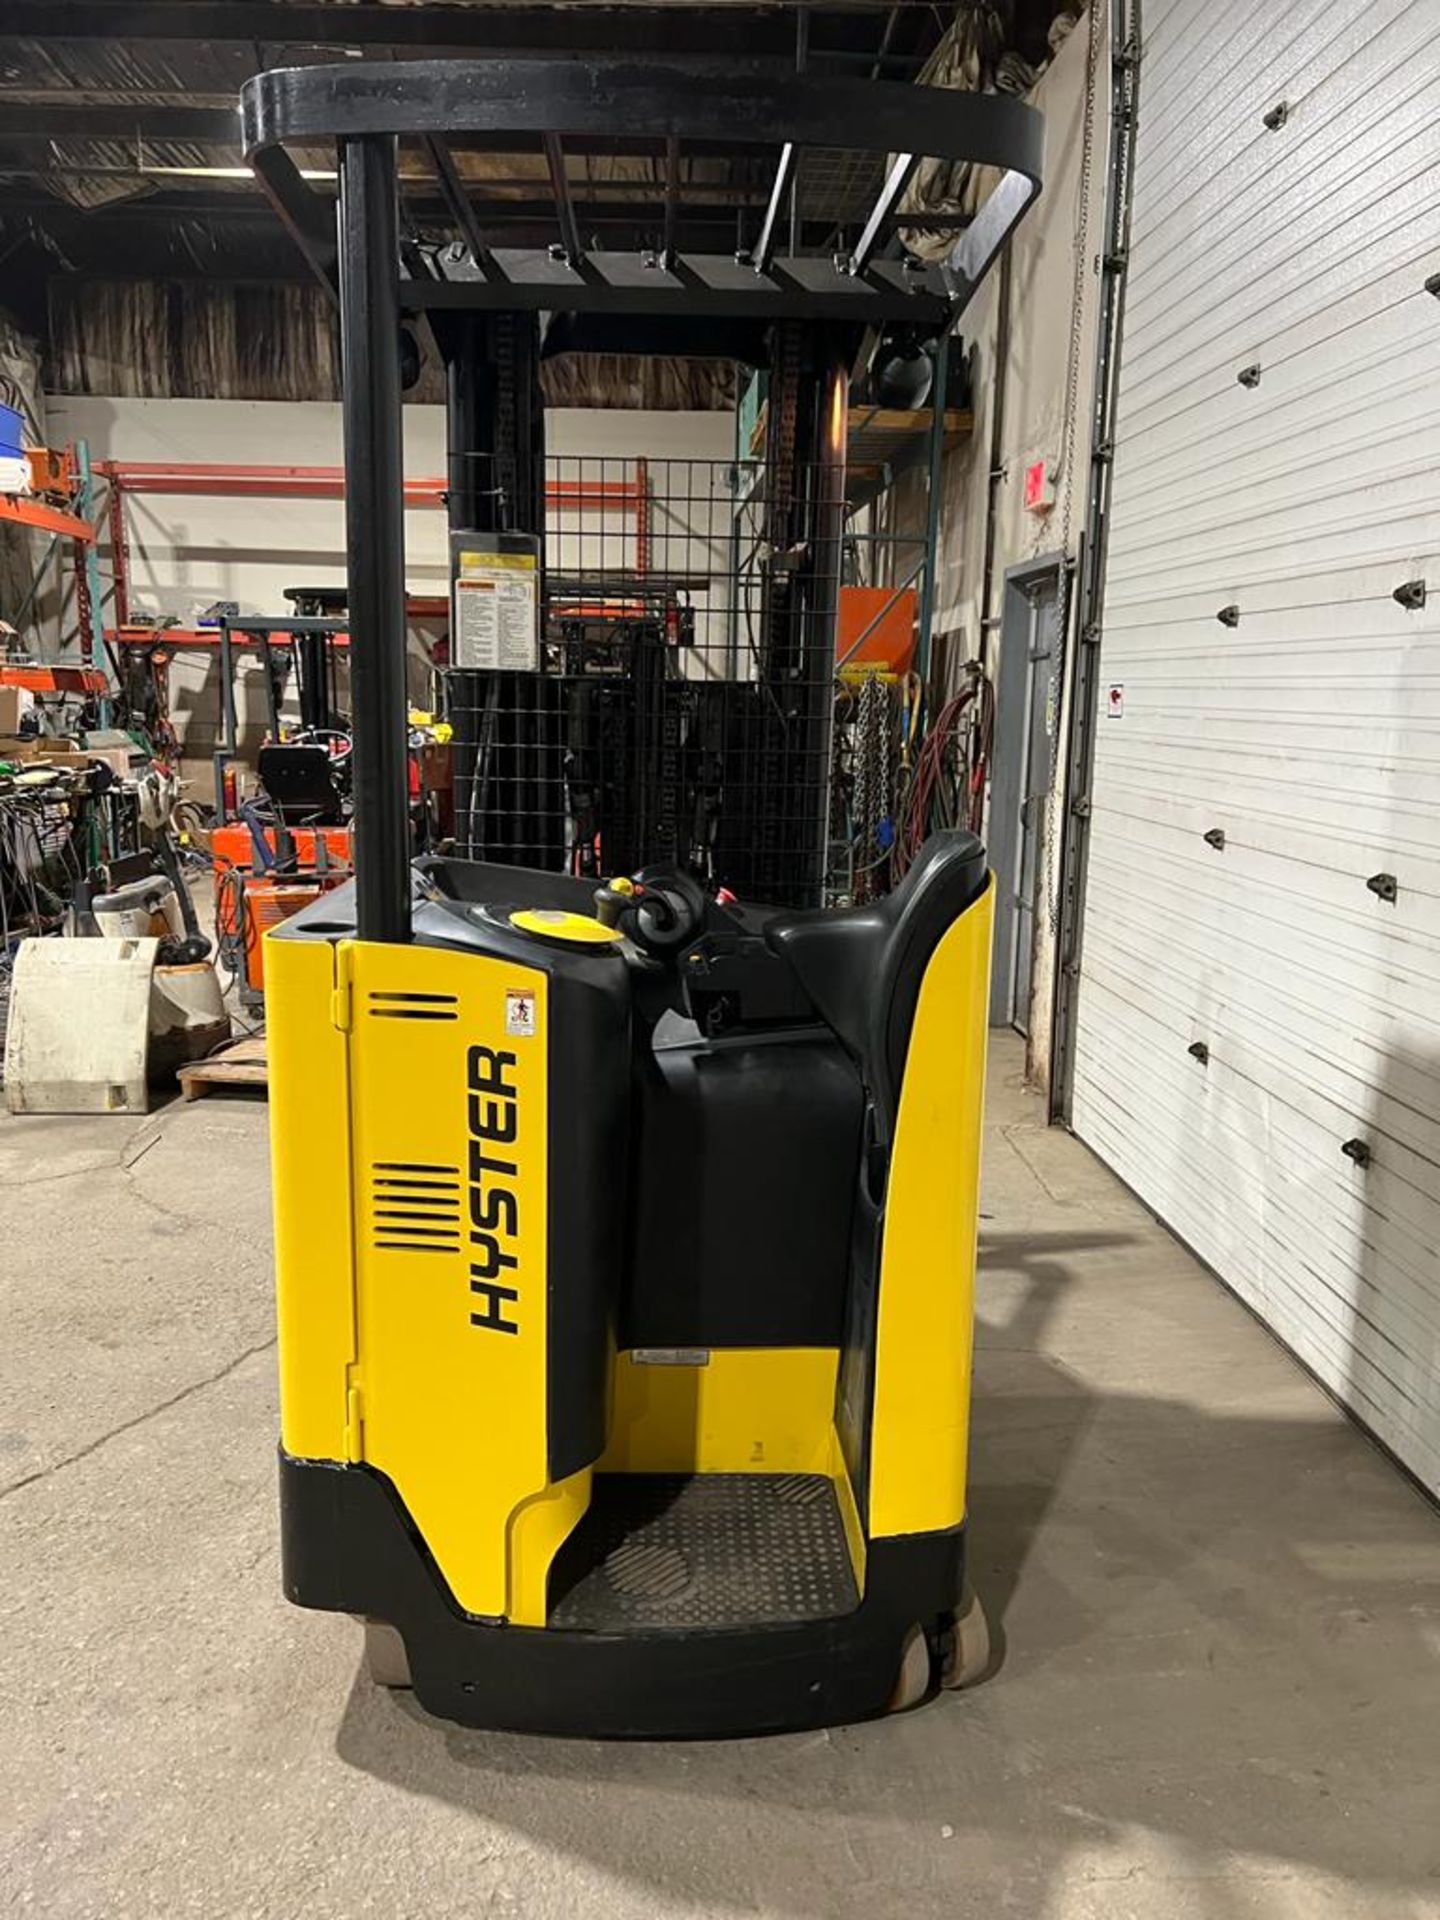 2017 Hyster Reach Truck 3,500lbs capacity electric with 24V battery with sideshift 3-stage Mast & - Image 4 of 4